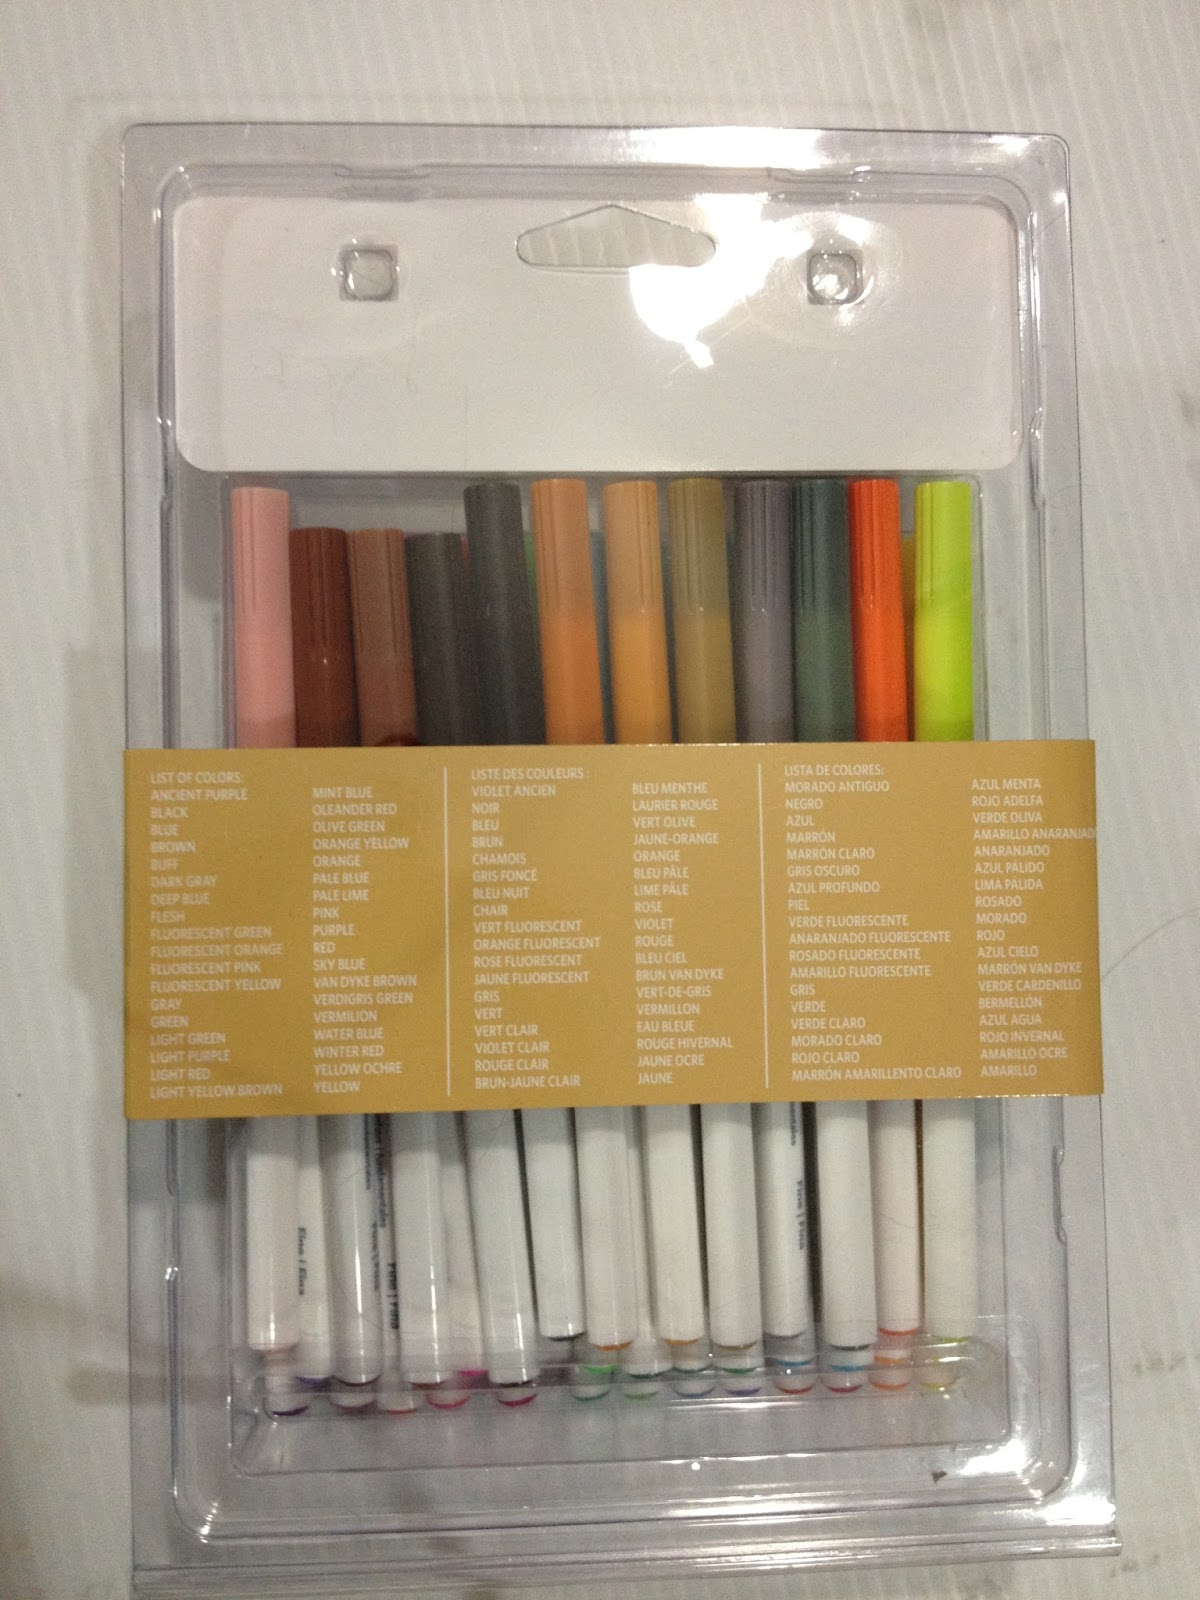 5 Reasons to Try The Artist's Loft Watercolor Markers - Swatch